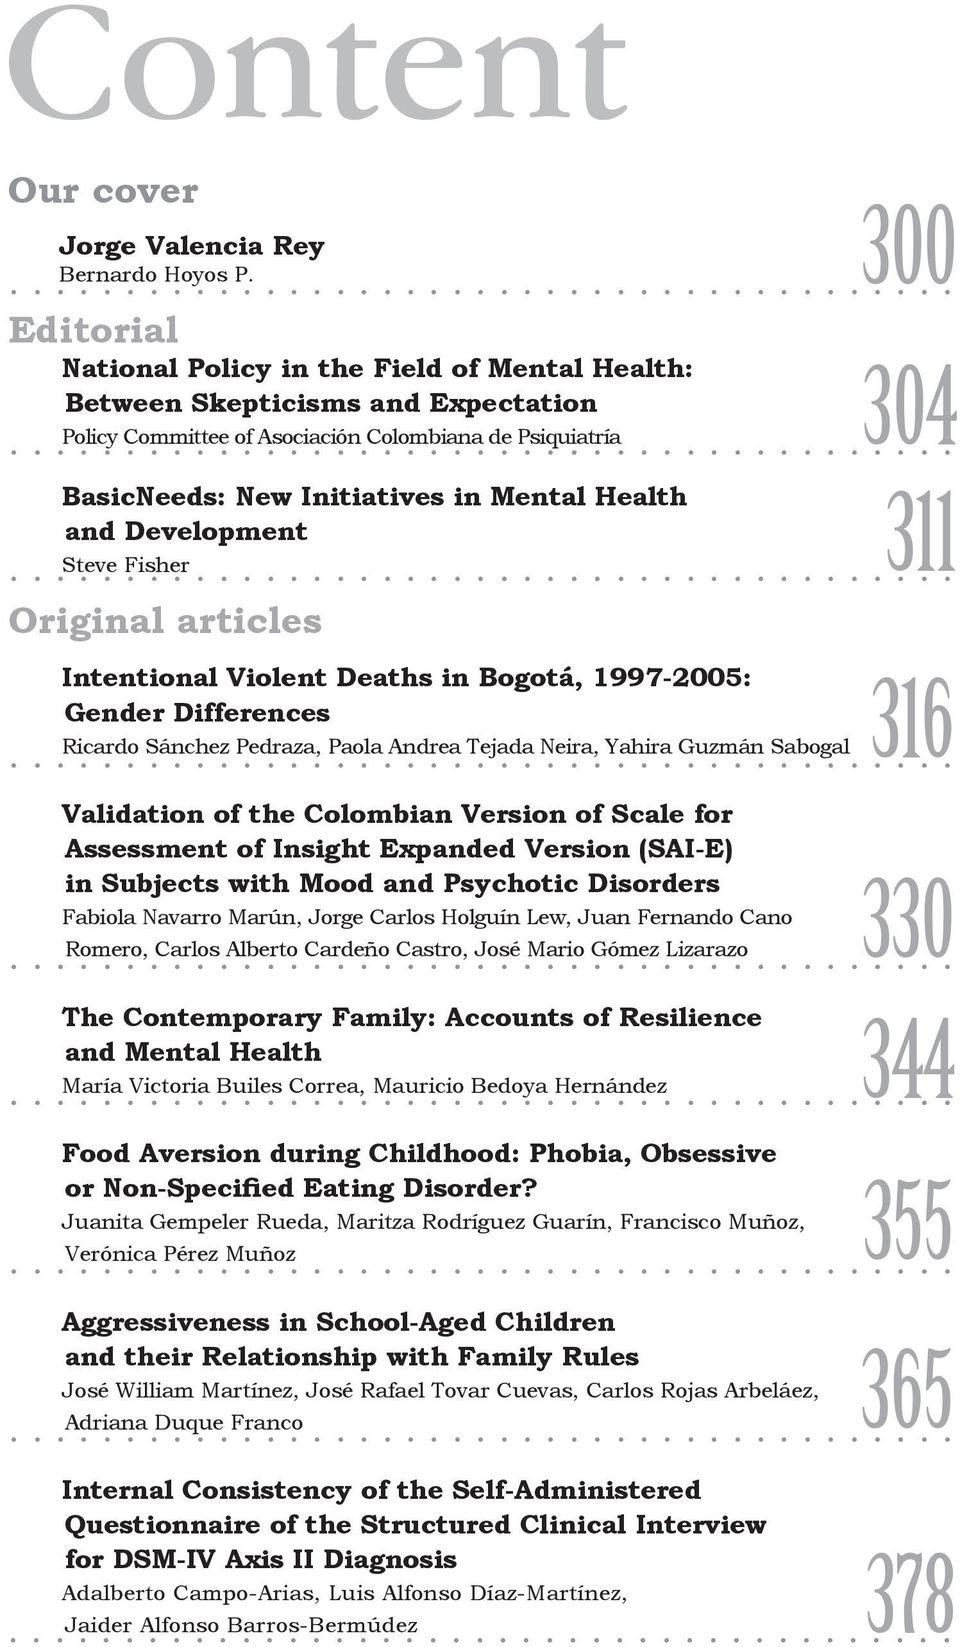 ........................................ BasicNeeds: New Initiatives in Mental Health and Development 311... Steve.. Fisher.